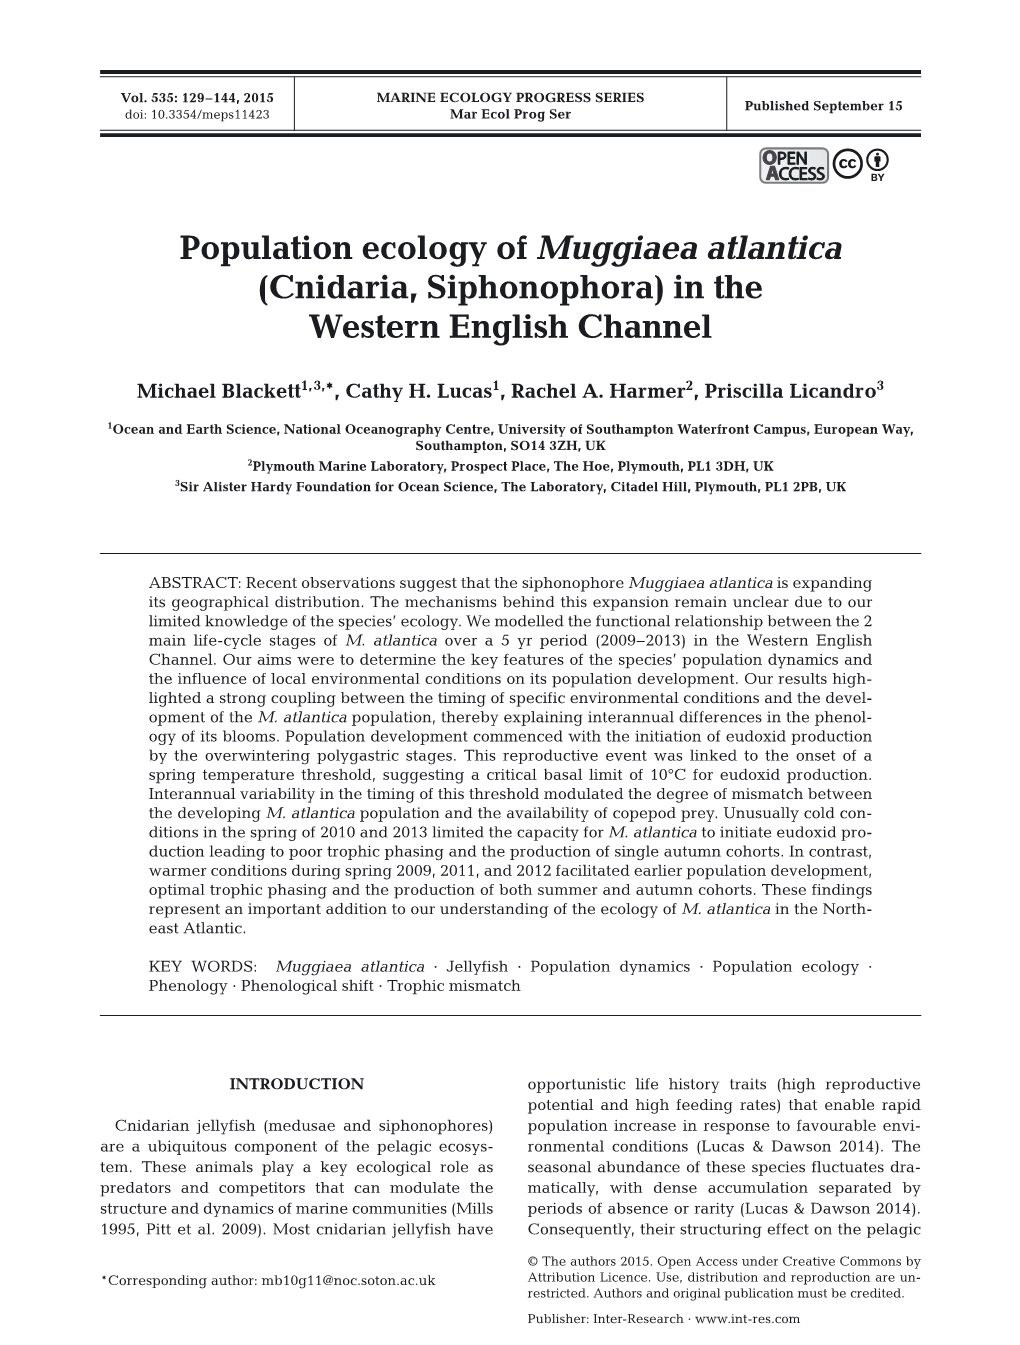 Population Ecology of Muggiaea Atlantica (Cnidaria, Siphonophora) in the Western English Channel